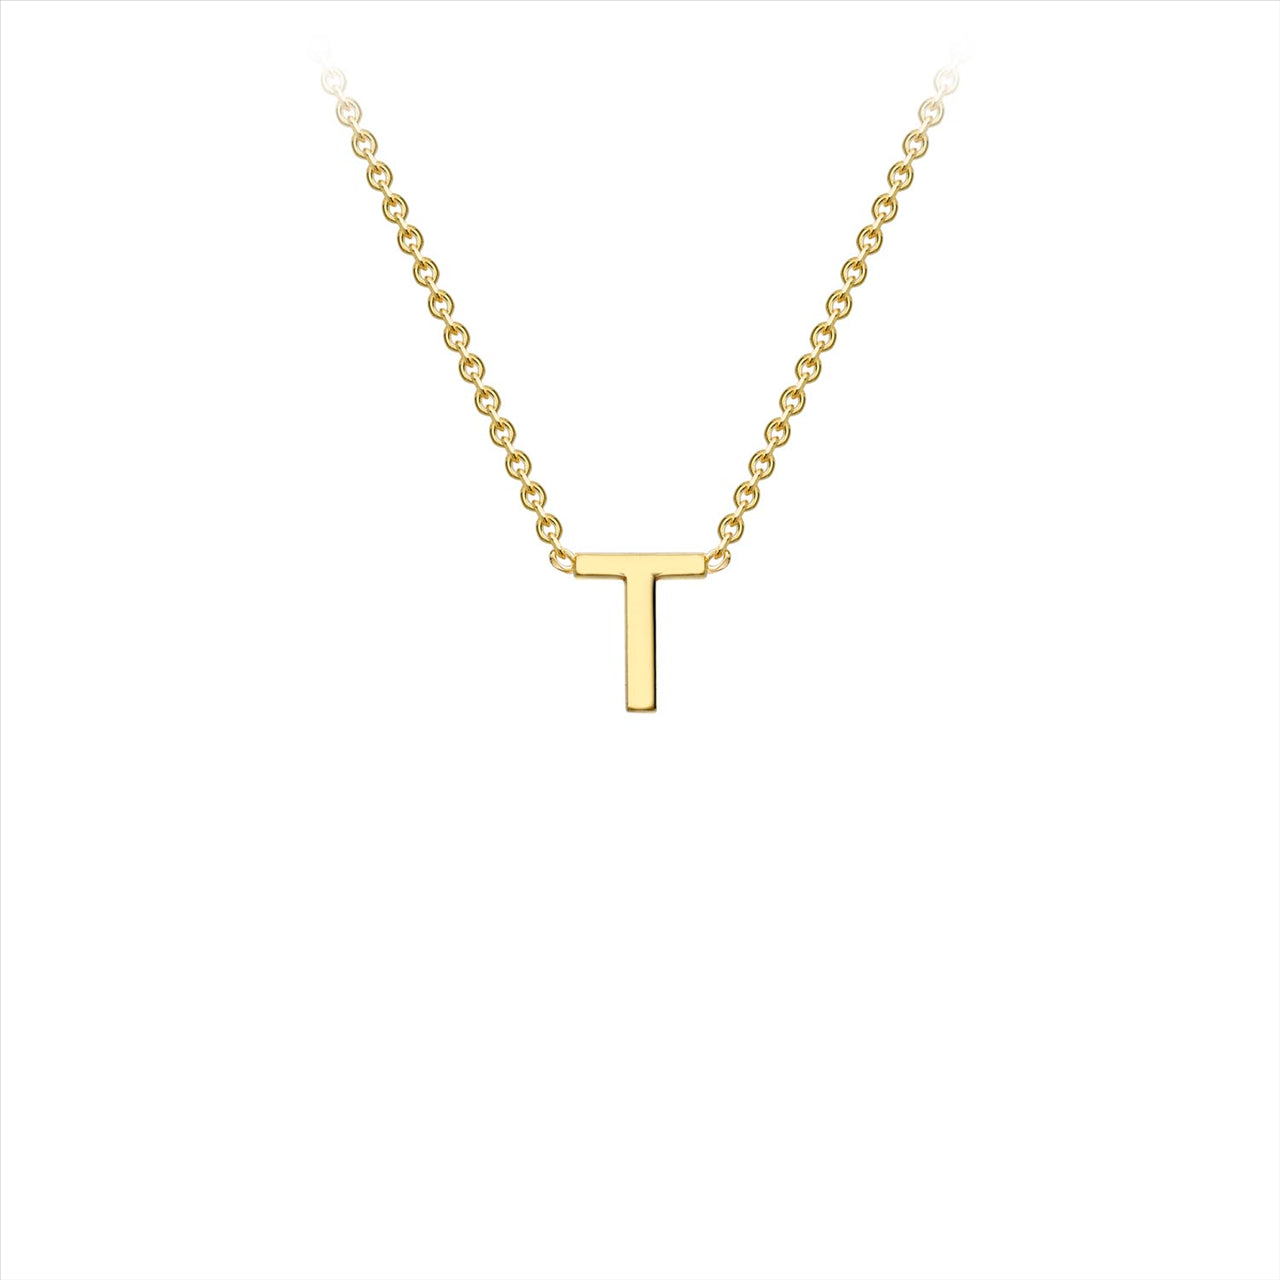 9K Yellow Gold 'T' Initial Adjustable Letter Necklace 38/43cm